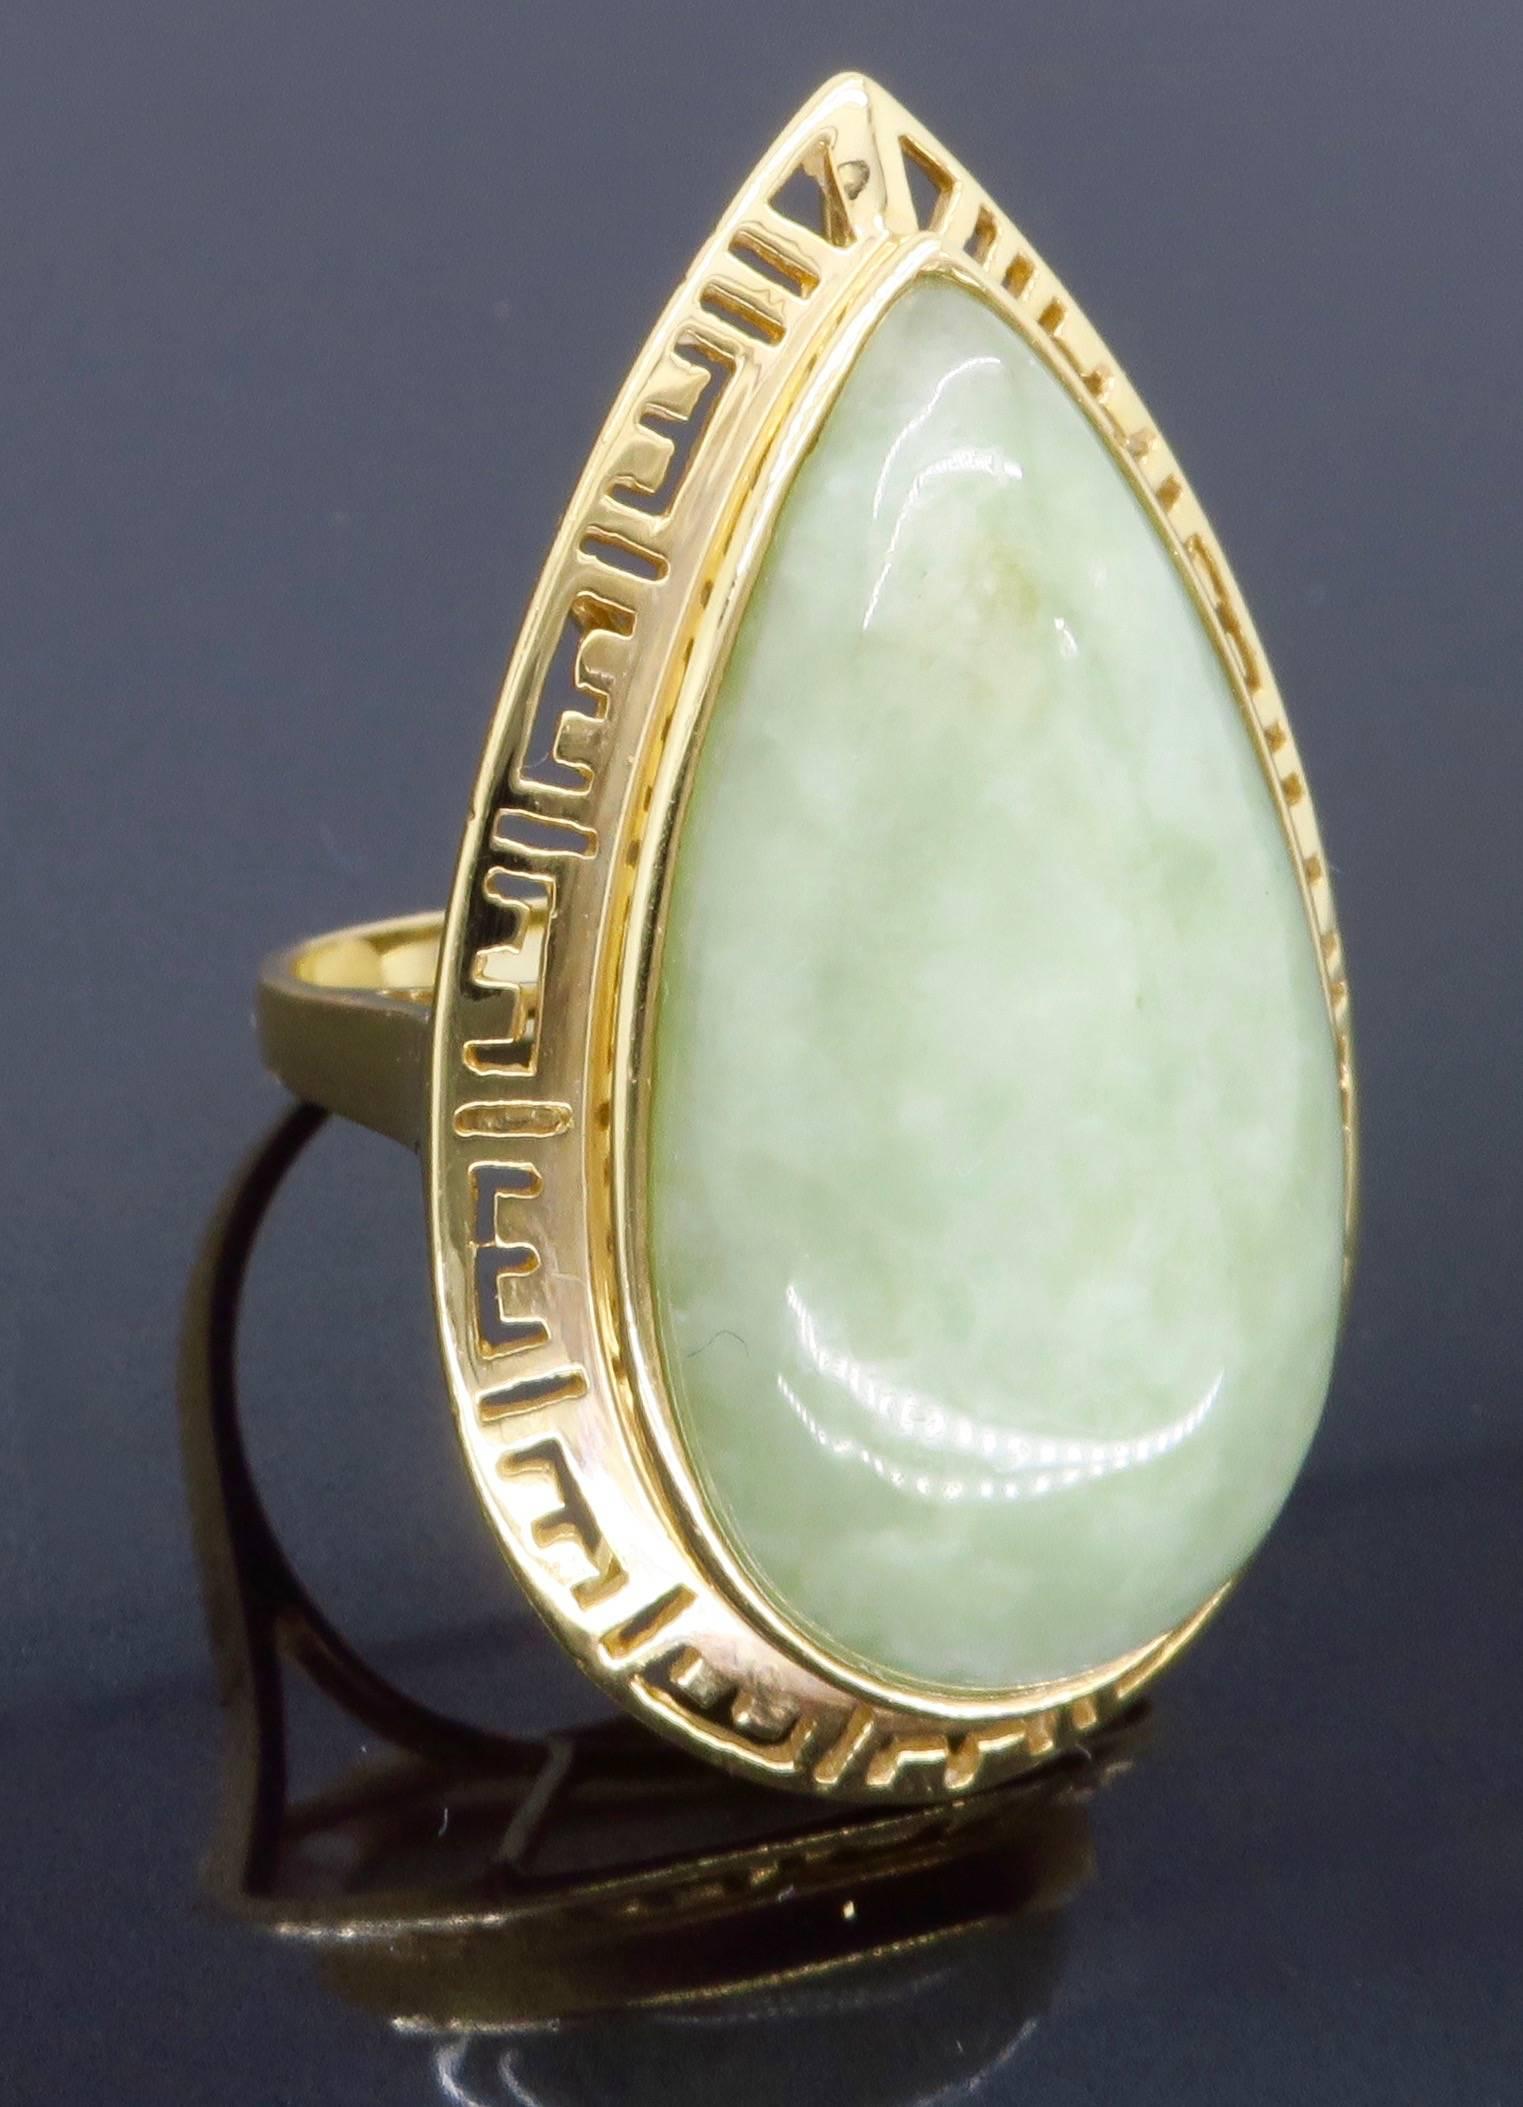 This Sanuk cocktail ring features a 26 x 15 x 6.4 MM Cabochon Cut Jadeite Jade. The featured gemstone is a beautiful semi transparent light mottled green. The 14K yellow gold ring weighs 9.8 grams and is a size 6.